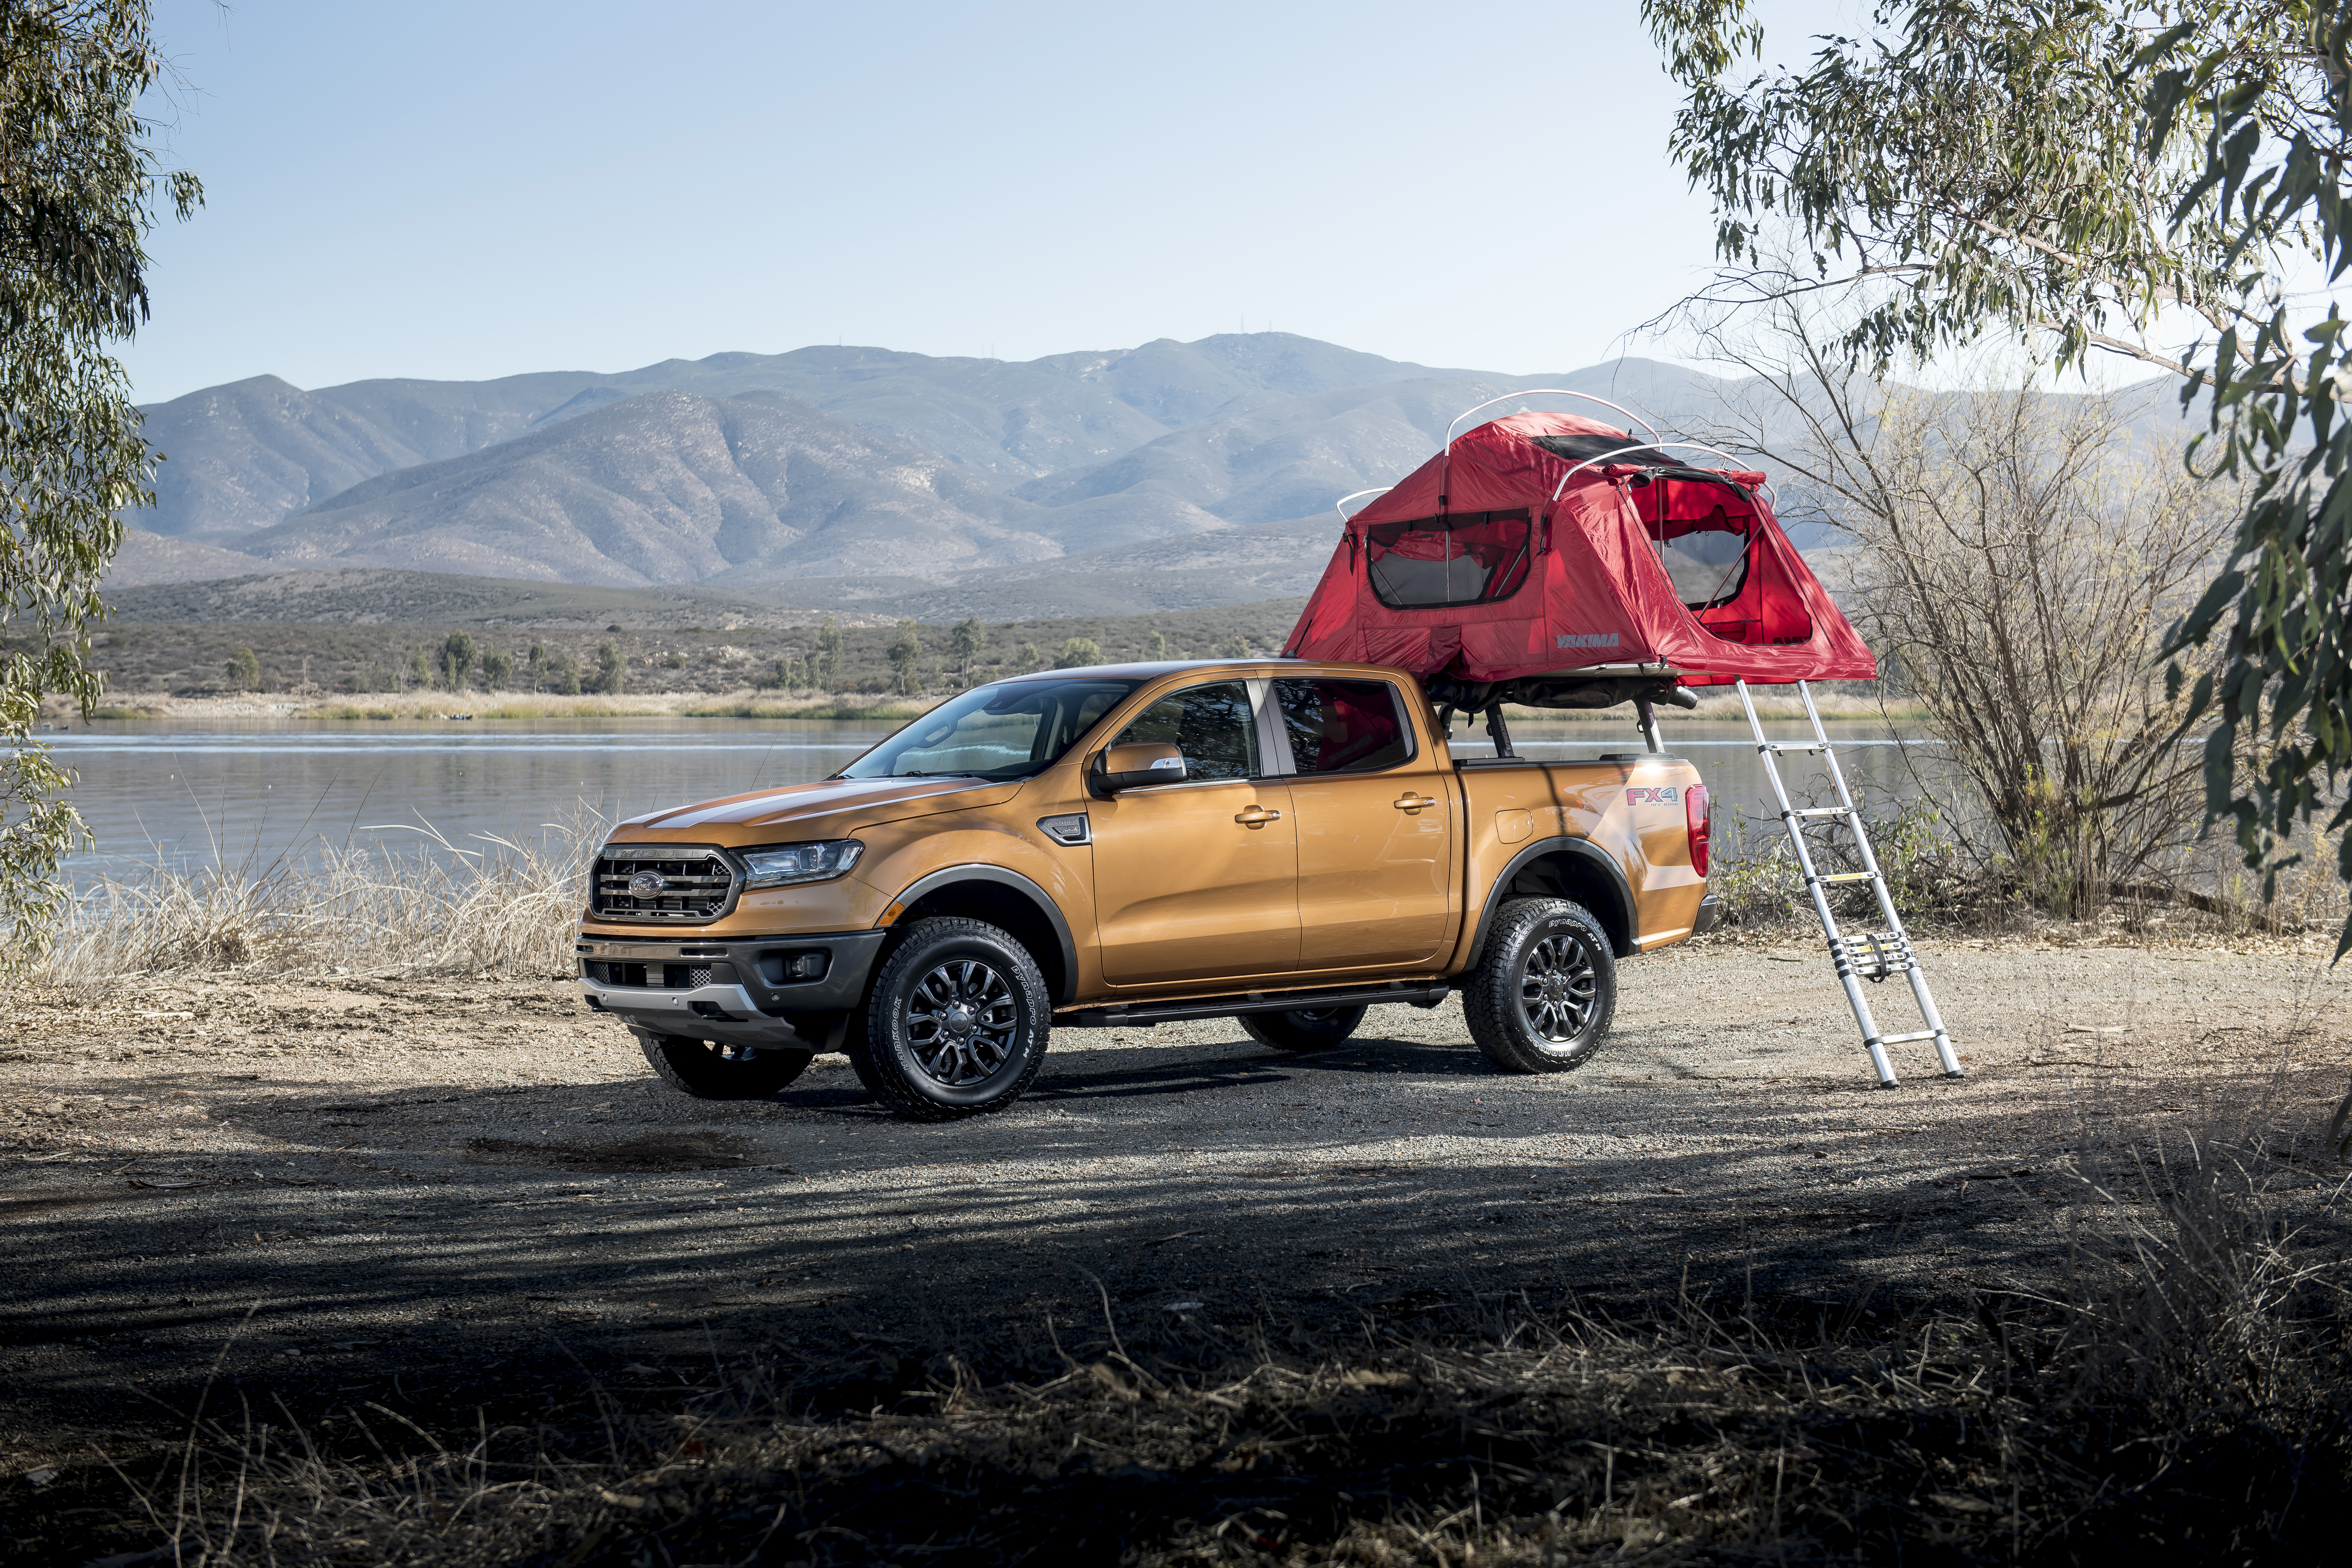 01 2020 Ford Ranger FX4 Overland Rooftop Tent Camping